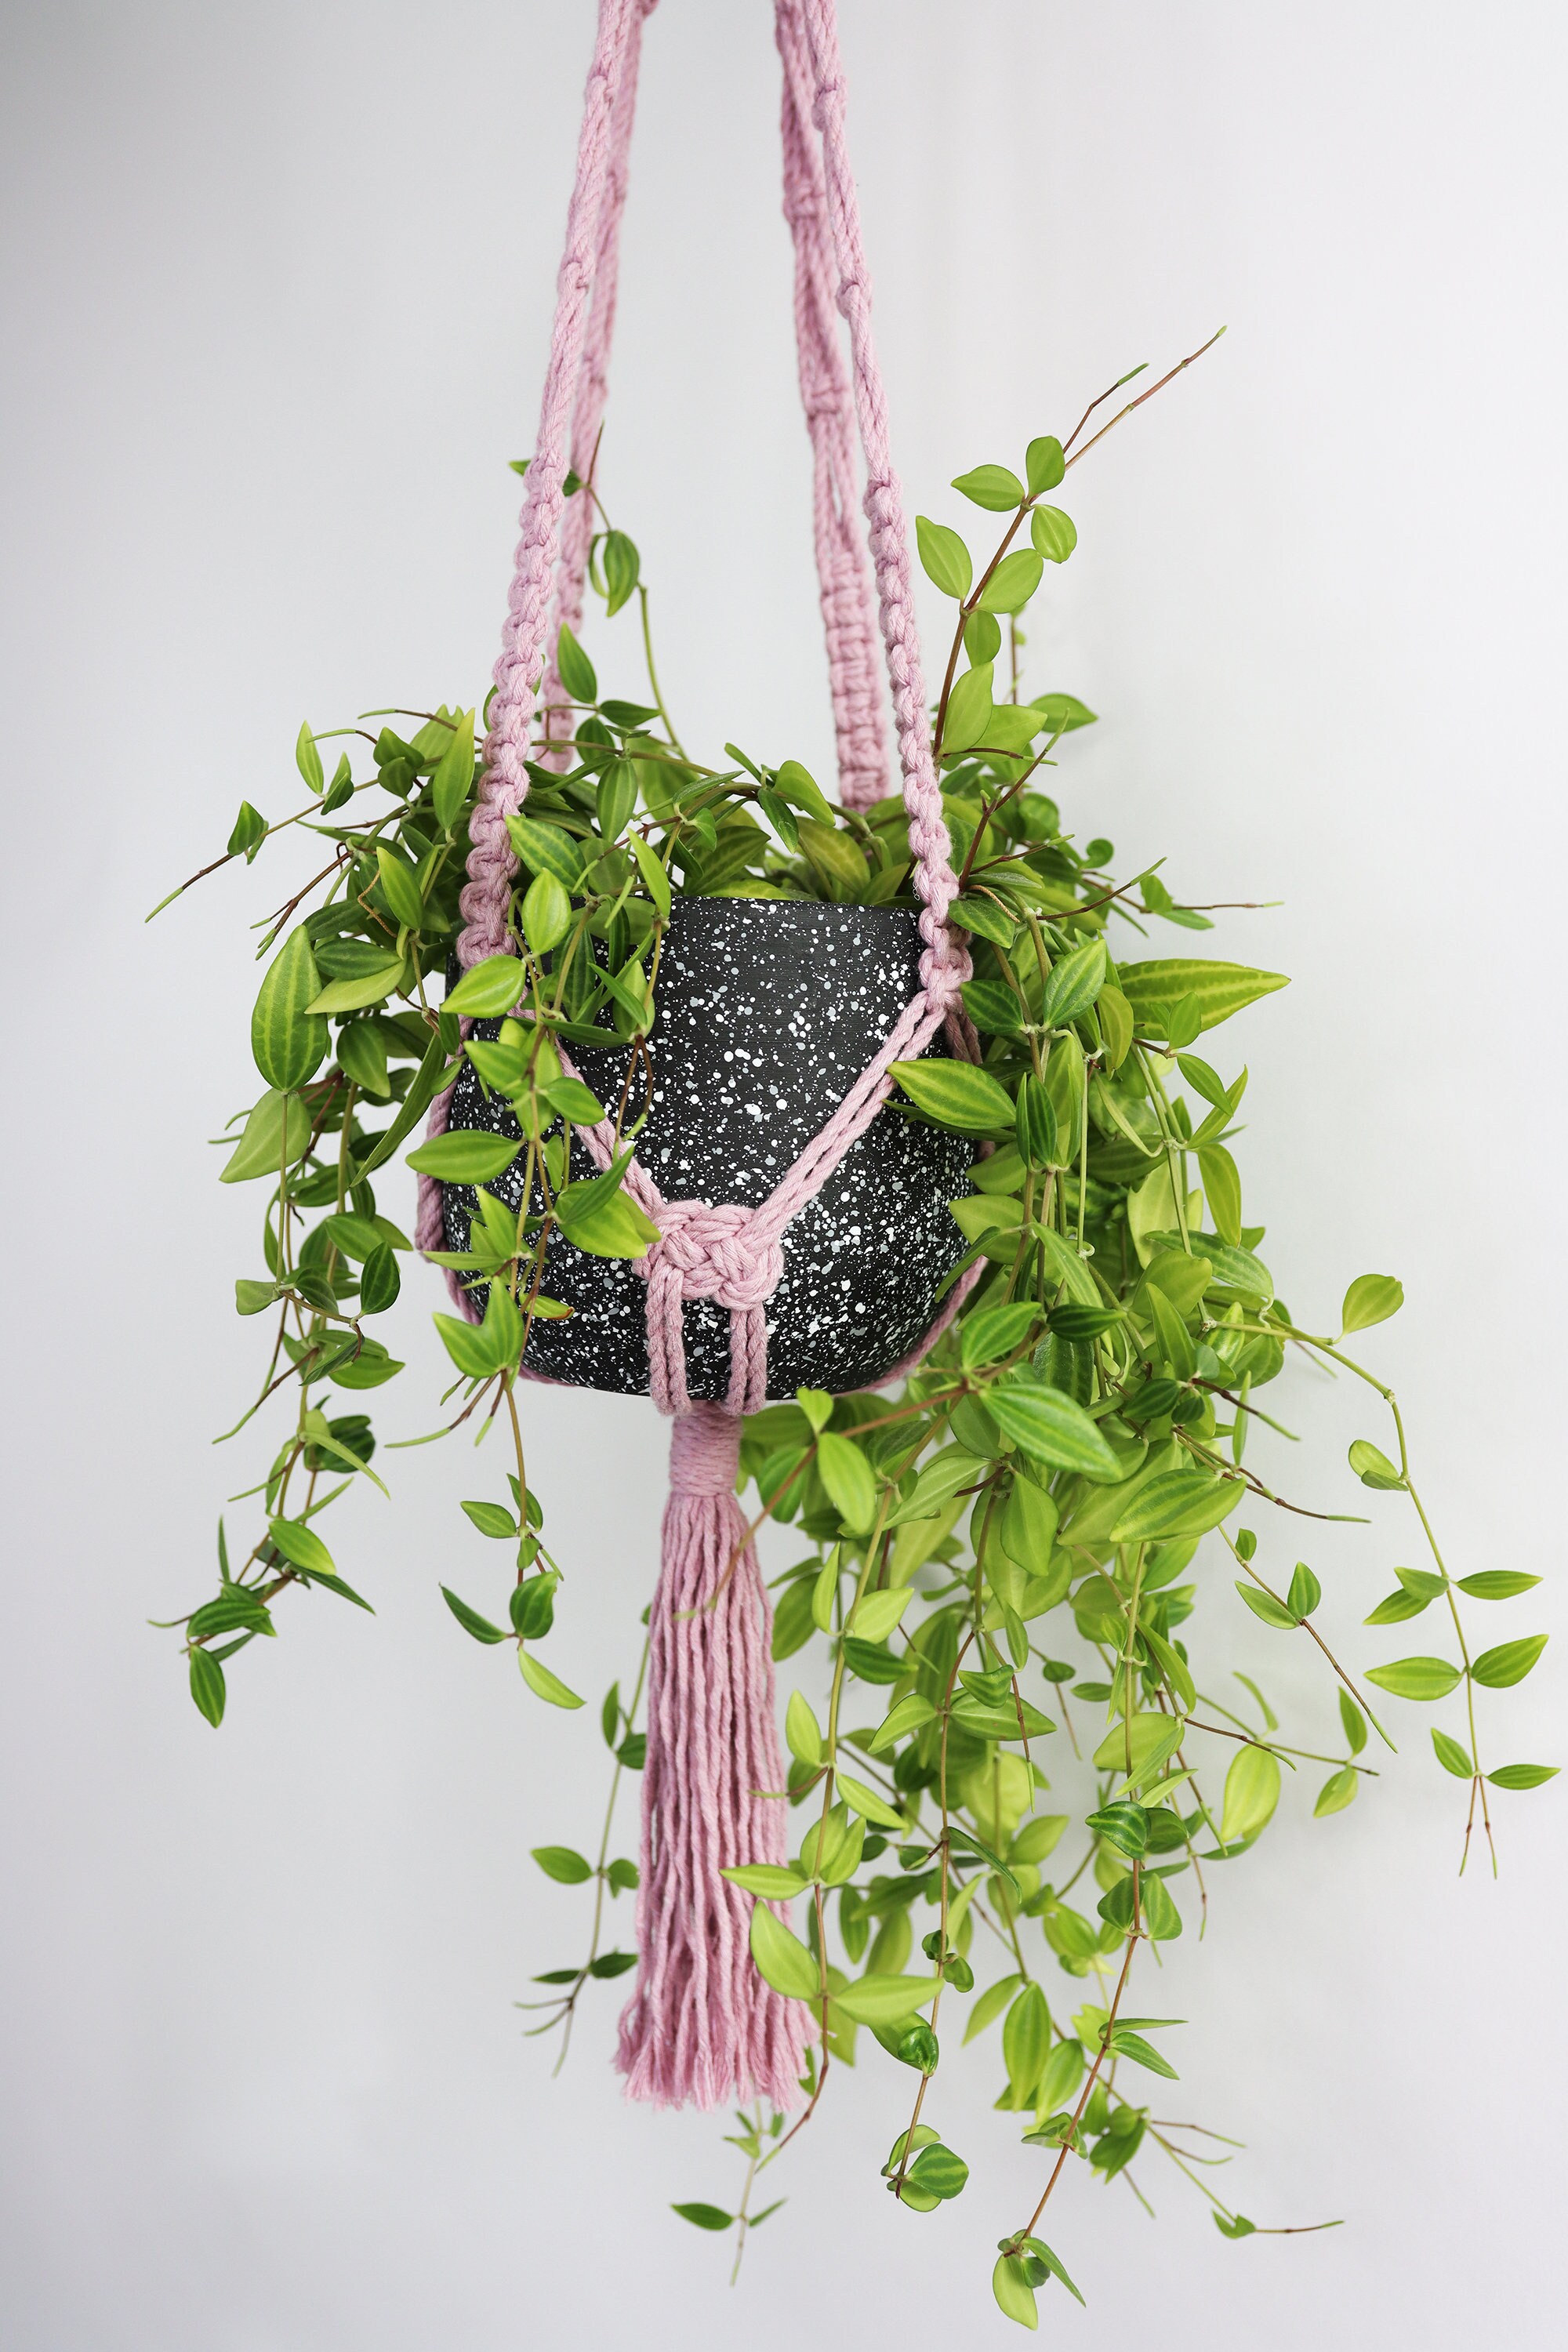 D.I.Y. Macrame Plant Hanger Kit With Video 